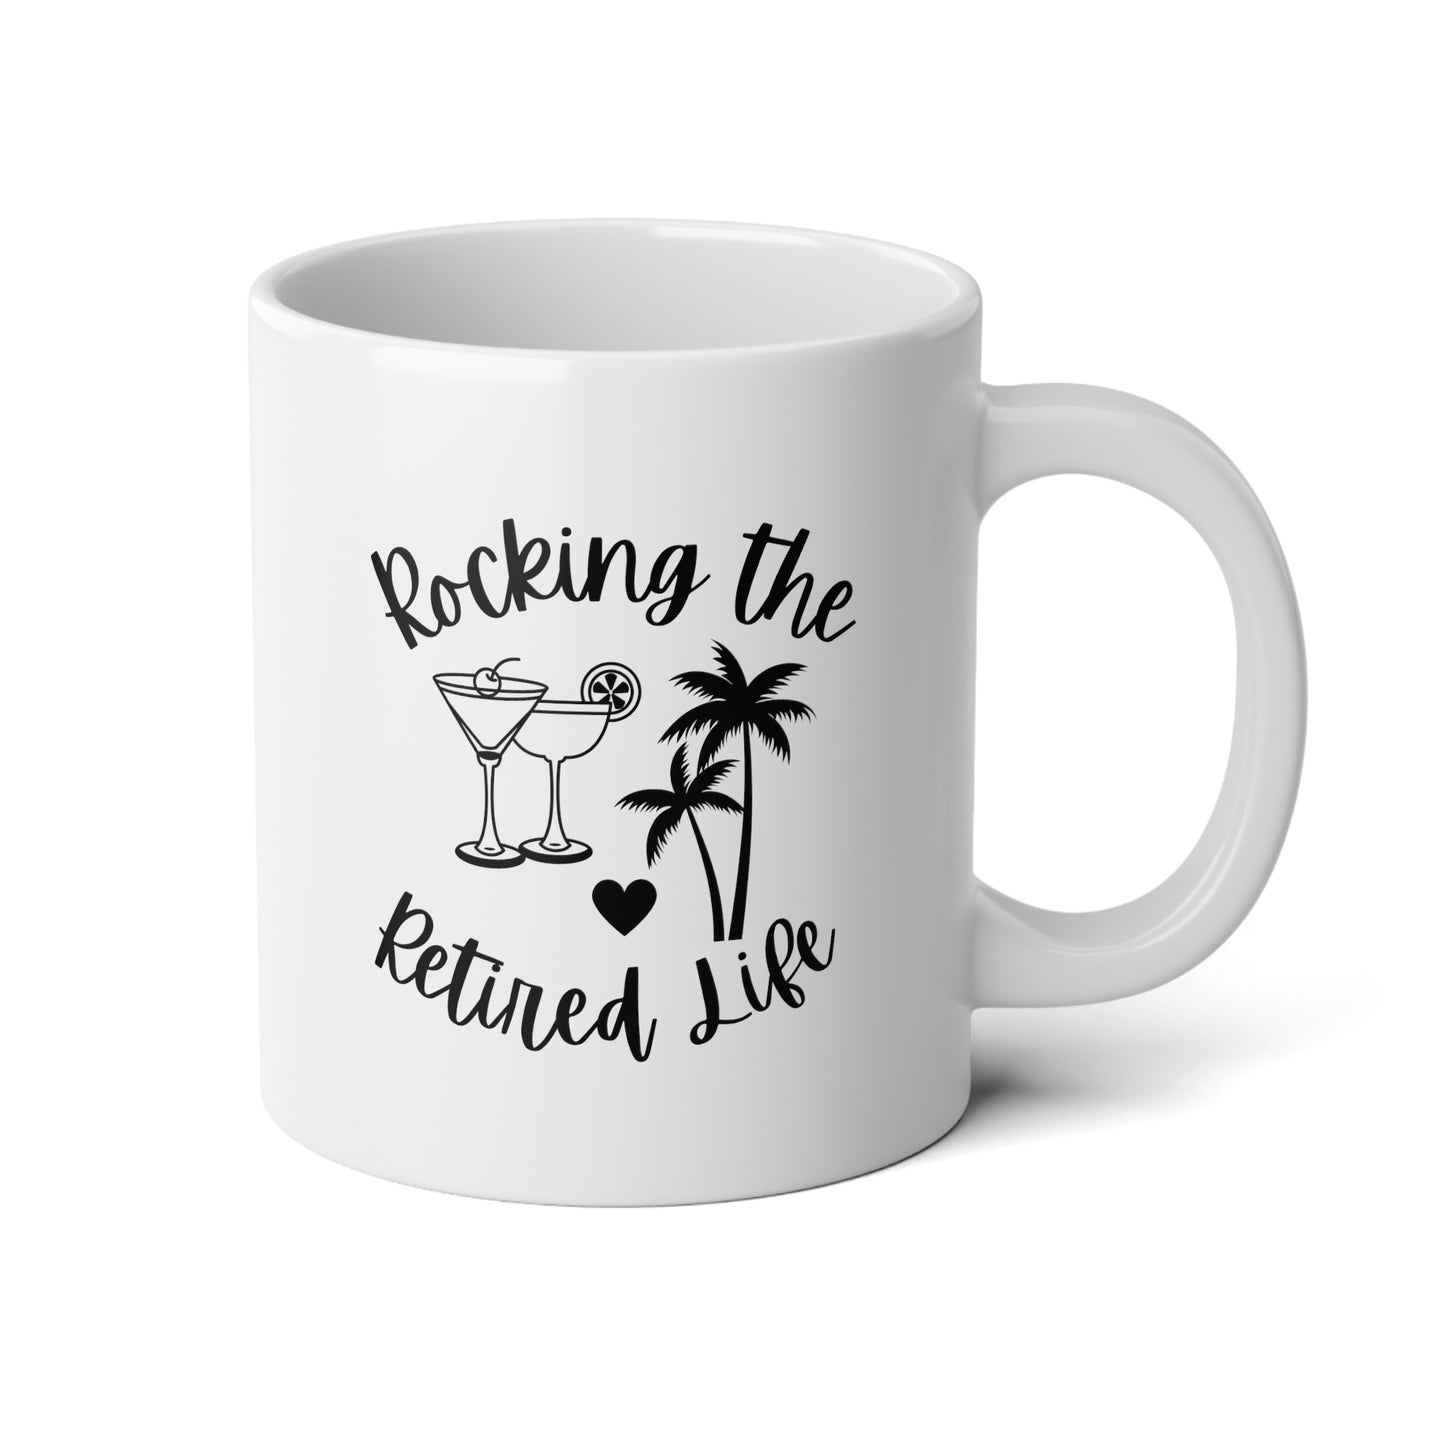 Rocking The Retired Life 20oz white funny large coffee mug gift for retirement party retiree her him wavey wares wavywares wavy wares